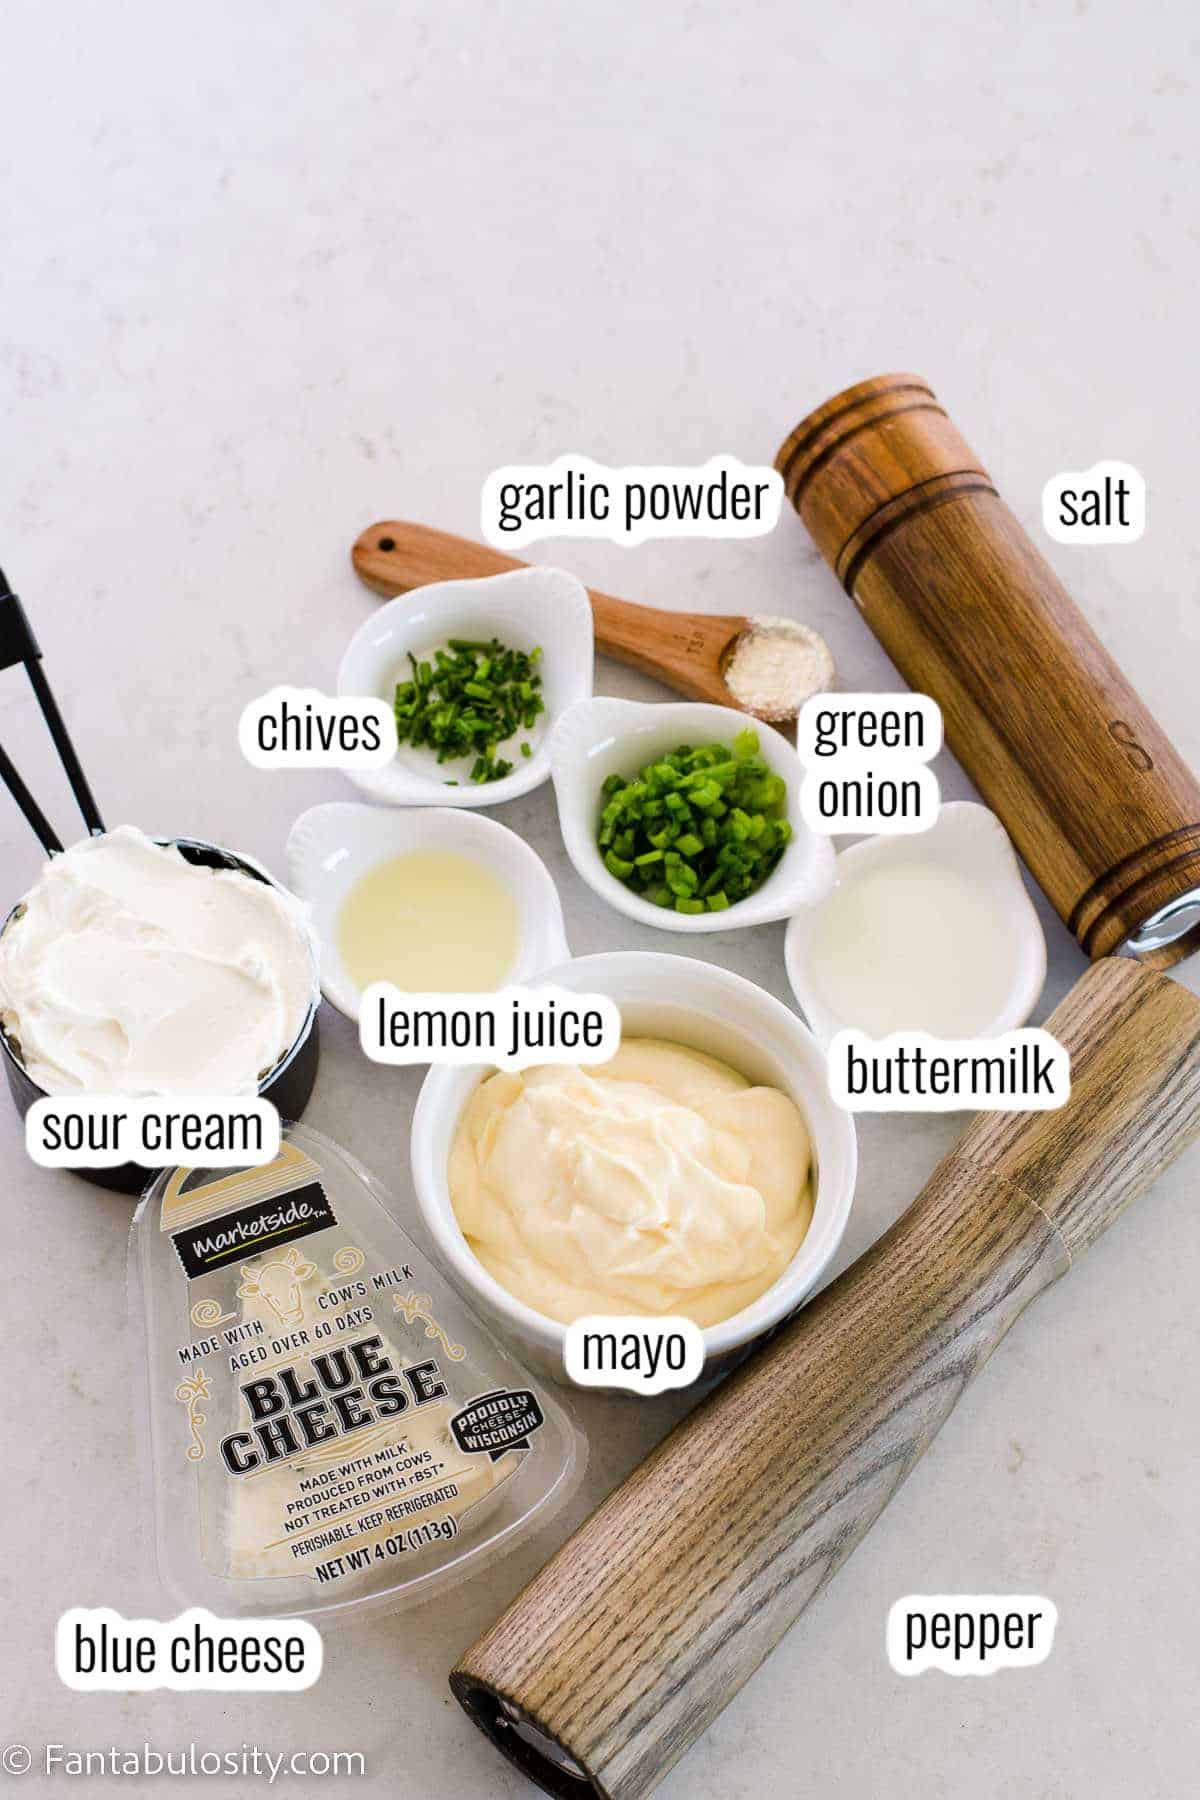 Labeled ingredients on white counter for blue cheese dip.